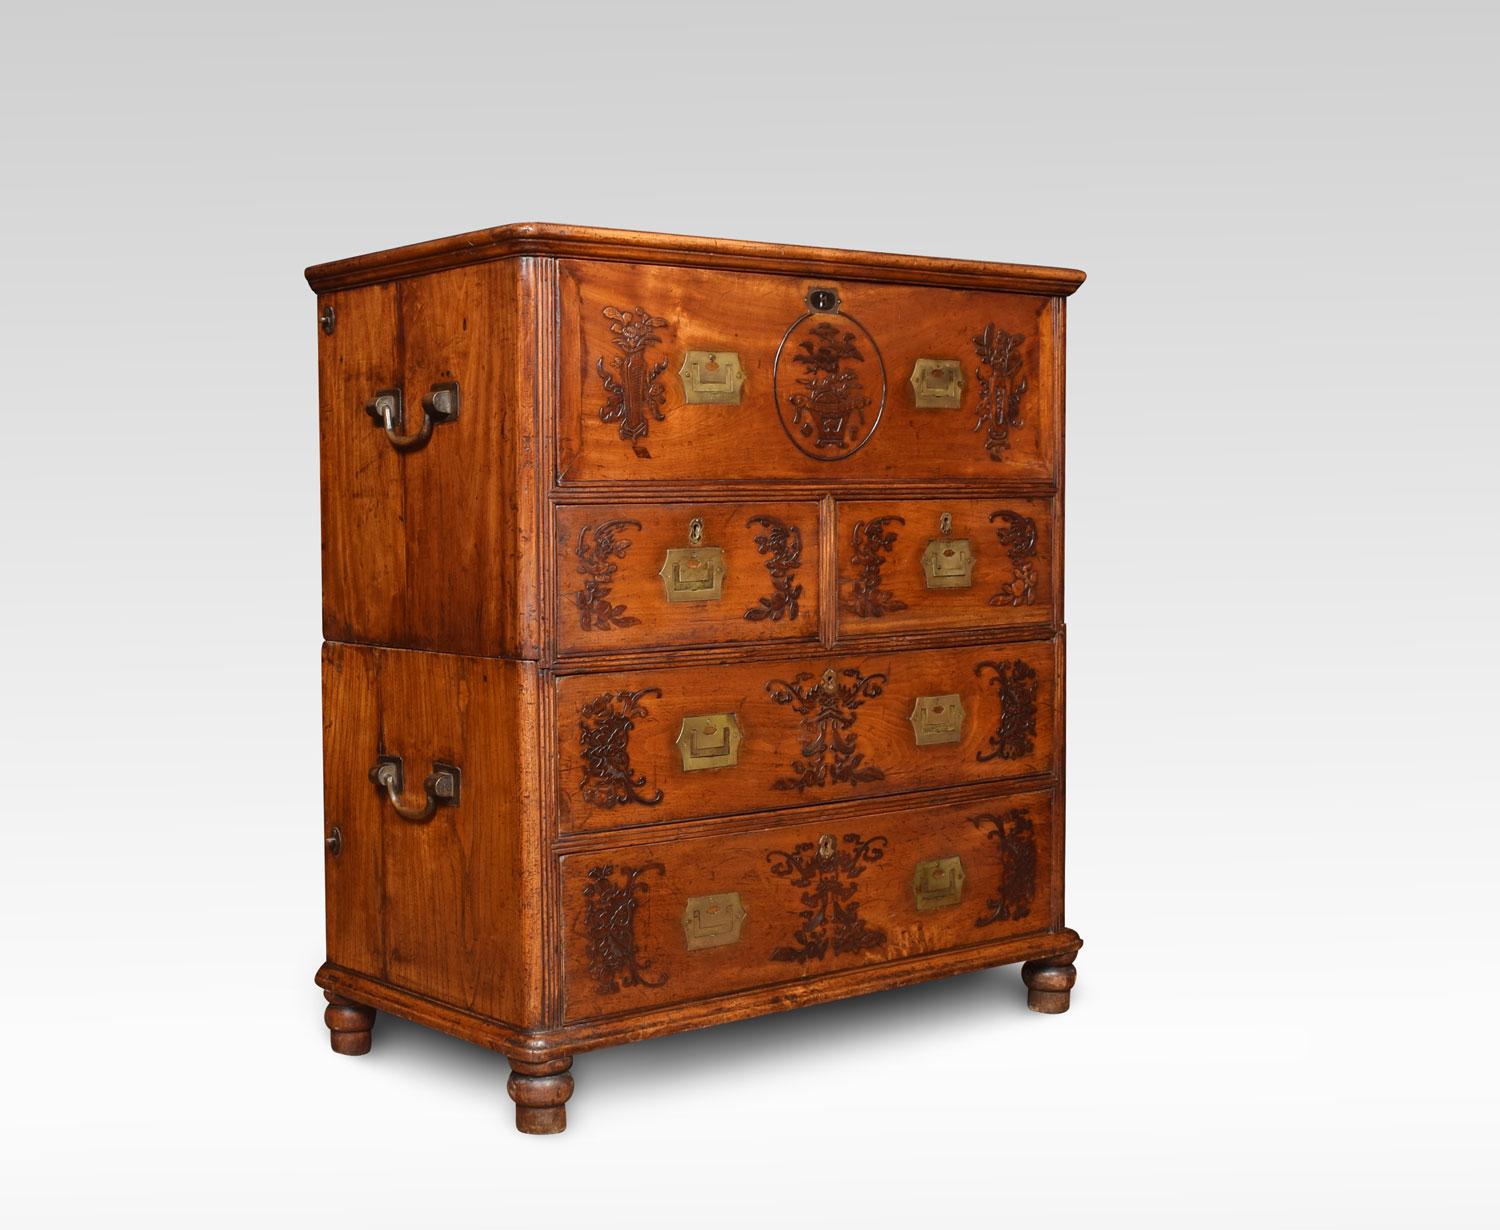 19th century Chinese camphor wood secrétaire Campaign chest in two sections, the secrétaire frieze drawer with fall-front writing surface and various compartments, above two short and two long drawers, enclosed by reeded corners, with solid brass